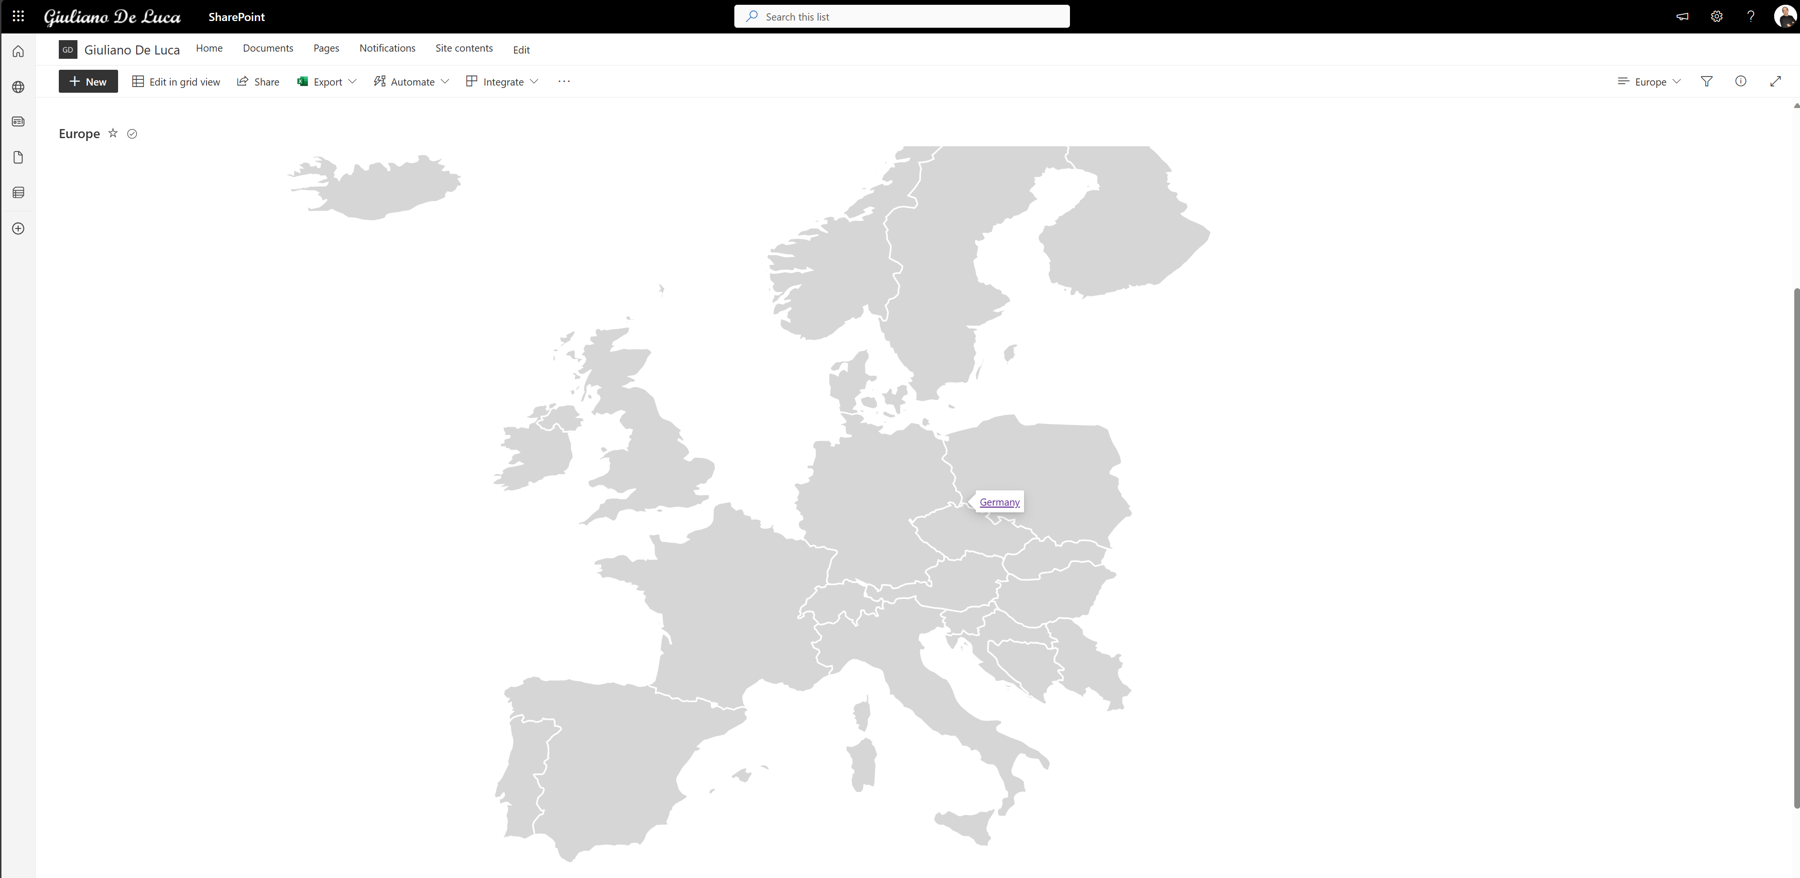 List view column formatting includes a web part with an interactive map.